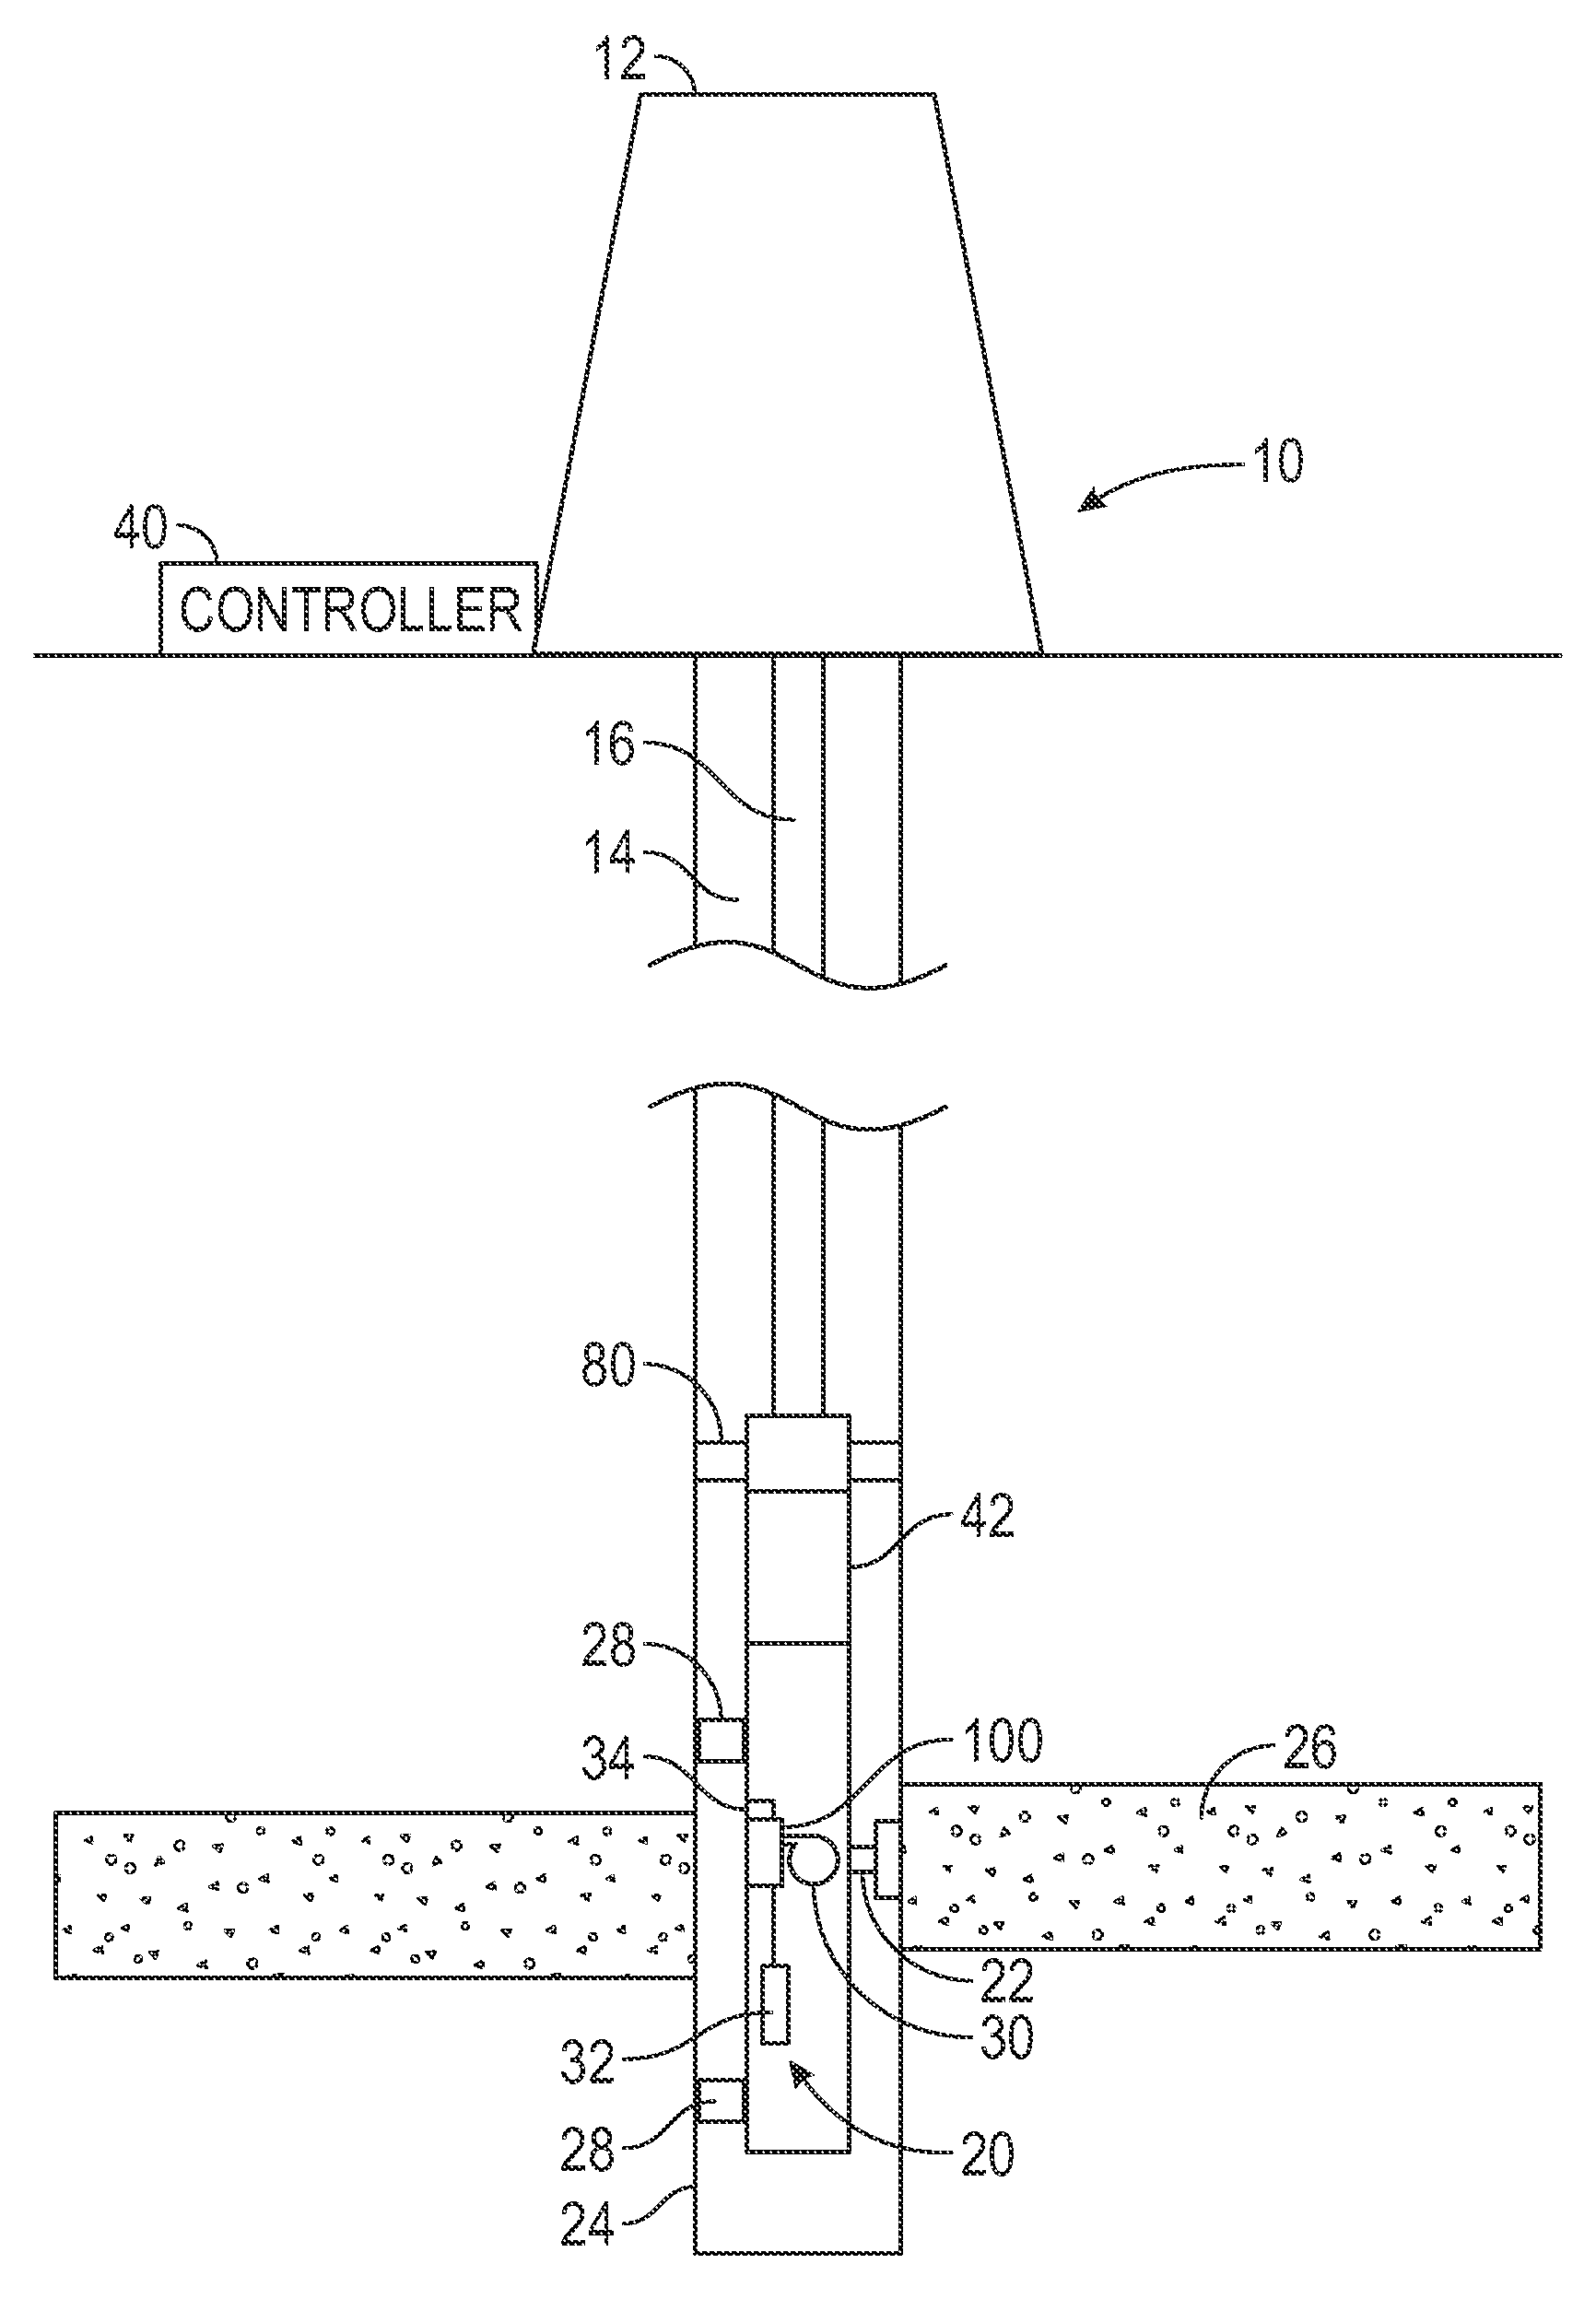 Separation system to separate phases of downhole fluids for individual analysis